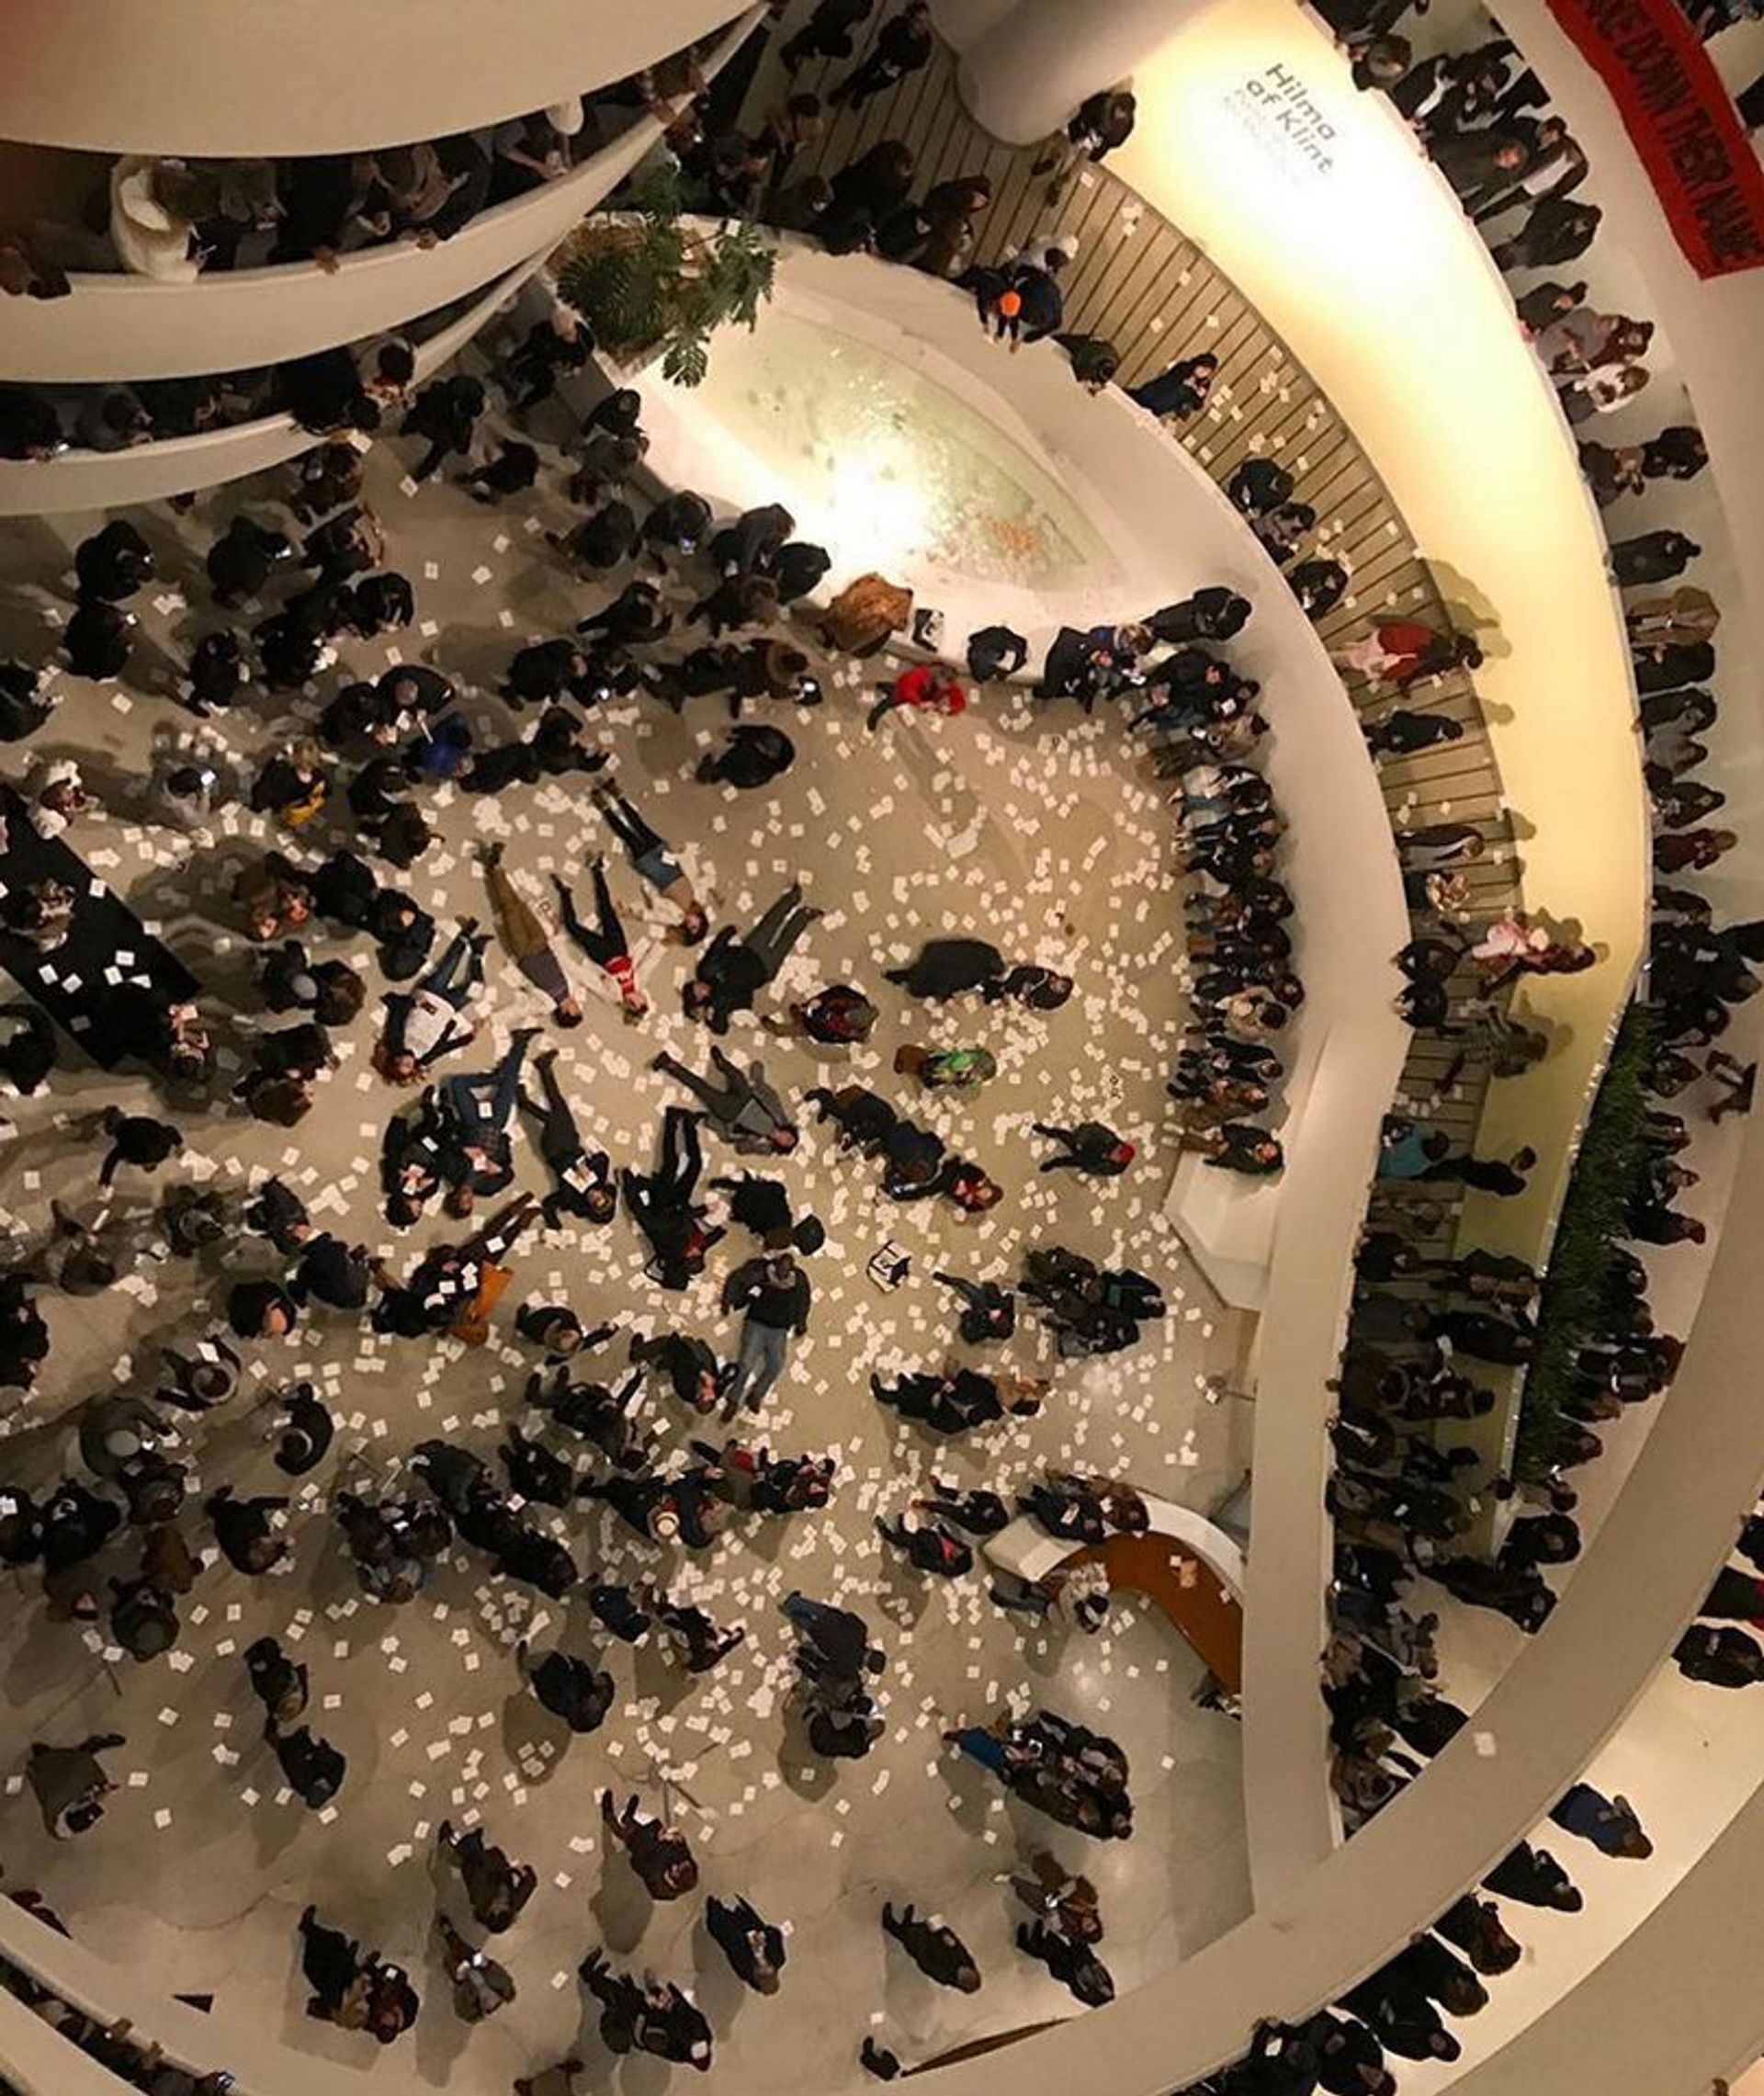 The activist group Pain (Prescription Addiction Intervention Now) holding a protest this year inside the Solomon R. Guggenheim Museum over Sackler sponsorship @sacklerpain/instagram